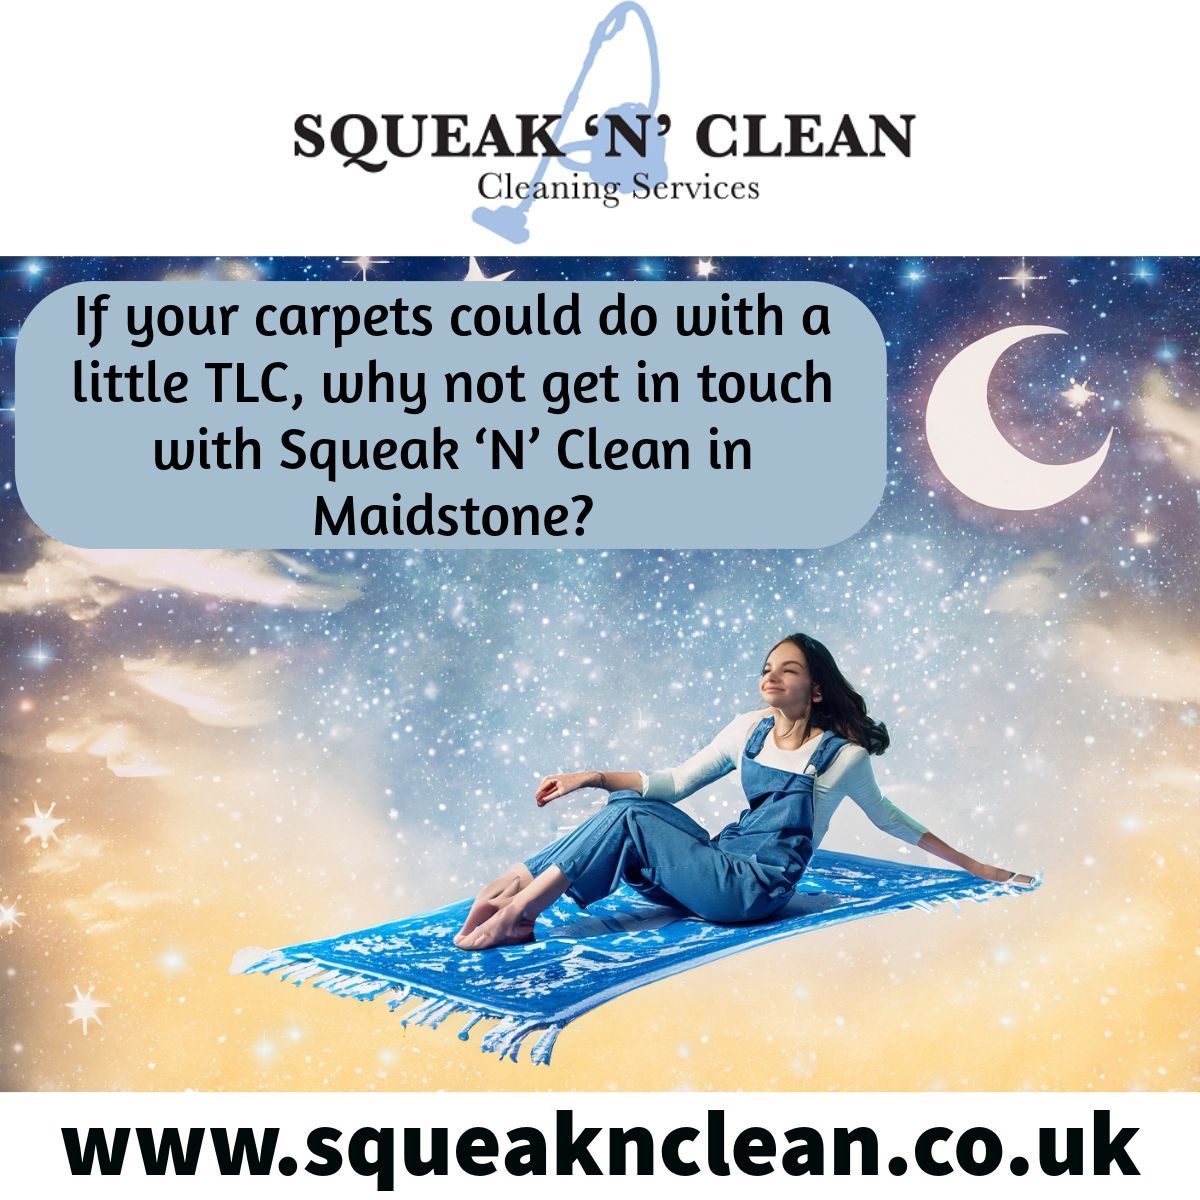 #domesticcleaning #commercialcleaning #ovencleaning #carpetcleaning #maidstone #maidstonekent #maidstonebusiness #kent #ashford #chatham #gillingham #sevenoaks #tunbridgewells #ashford  #cleaning #office cleaning #cleaning company